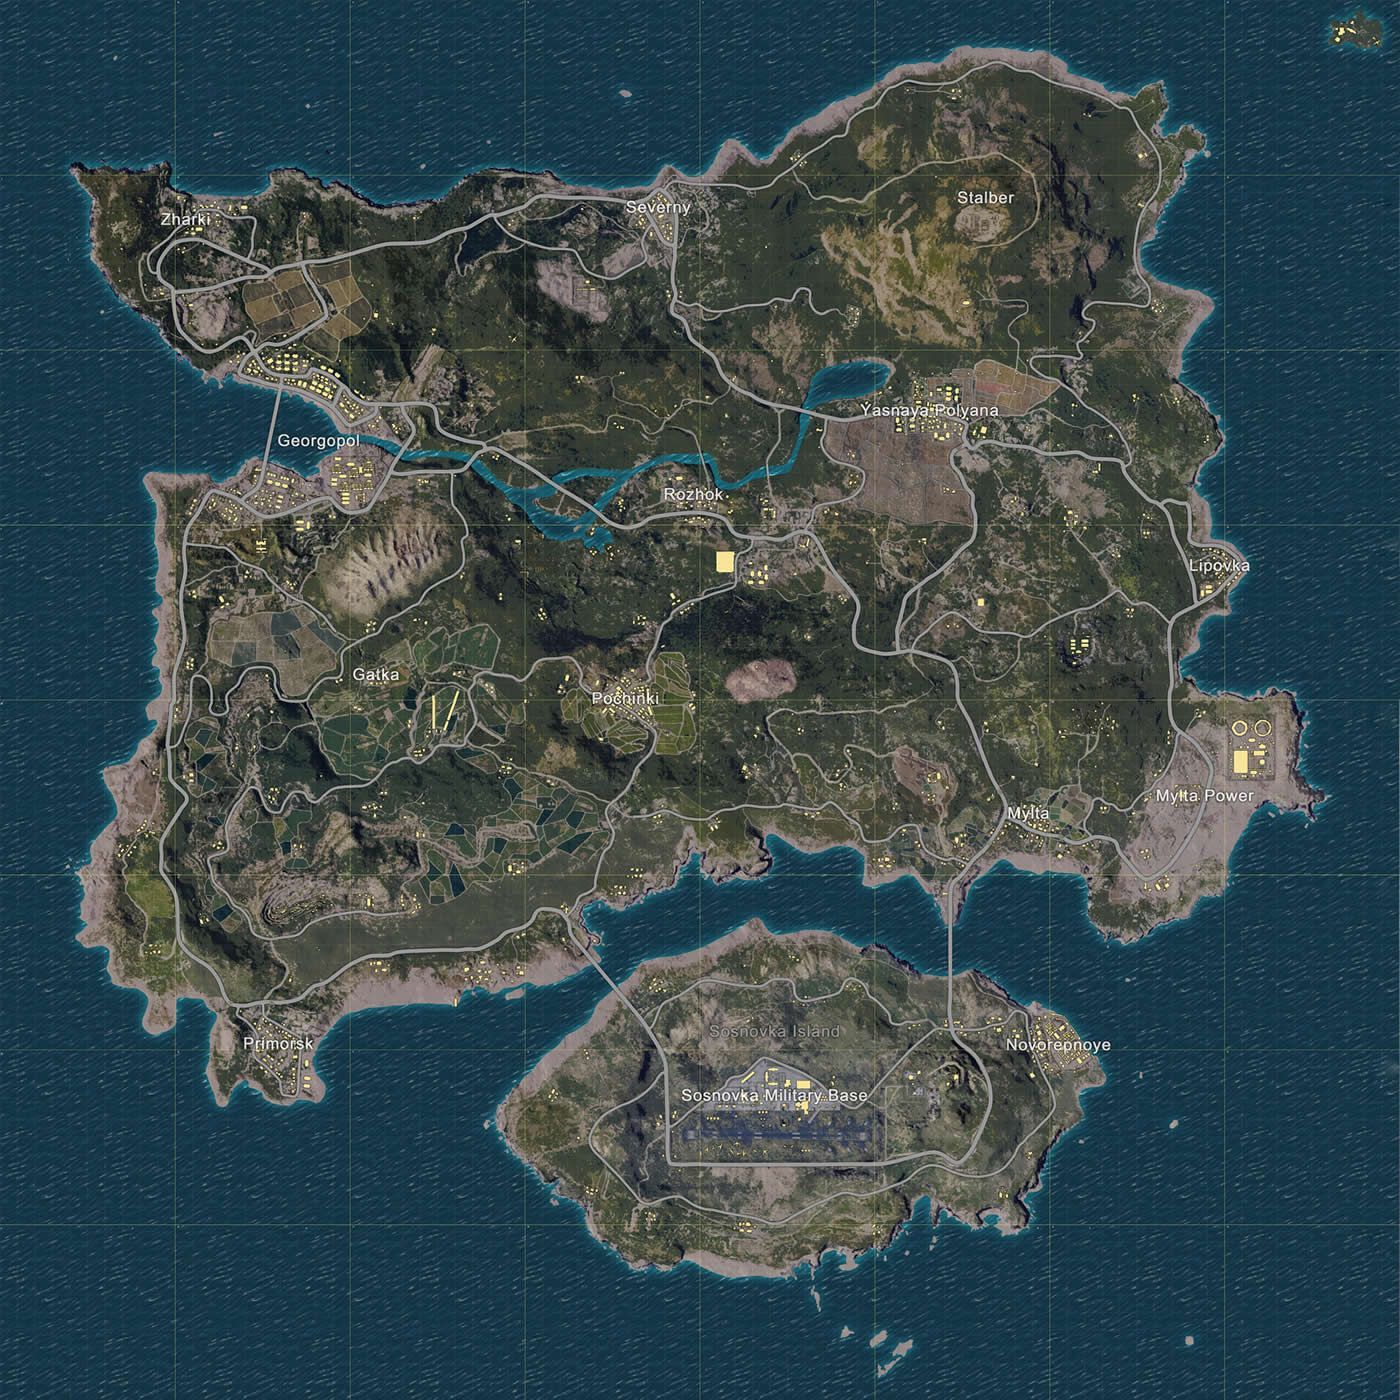 A complete guide to the Battlegrounds map and its locations